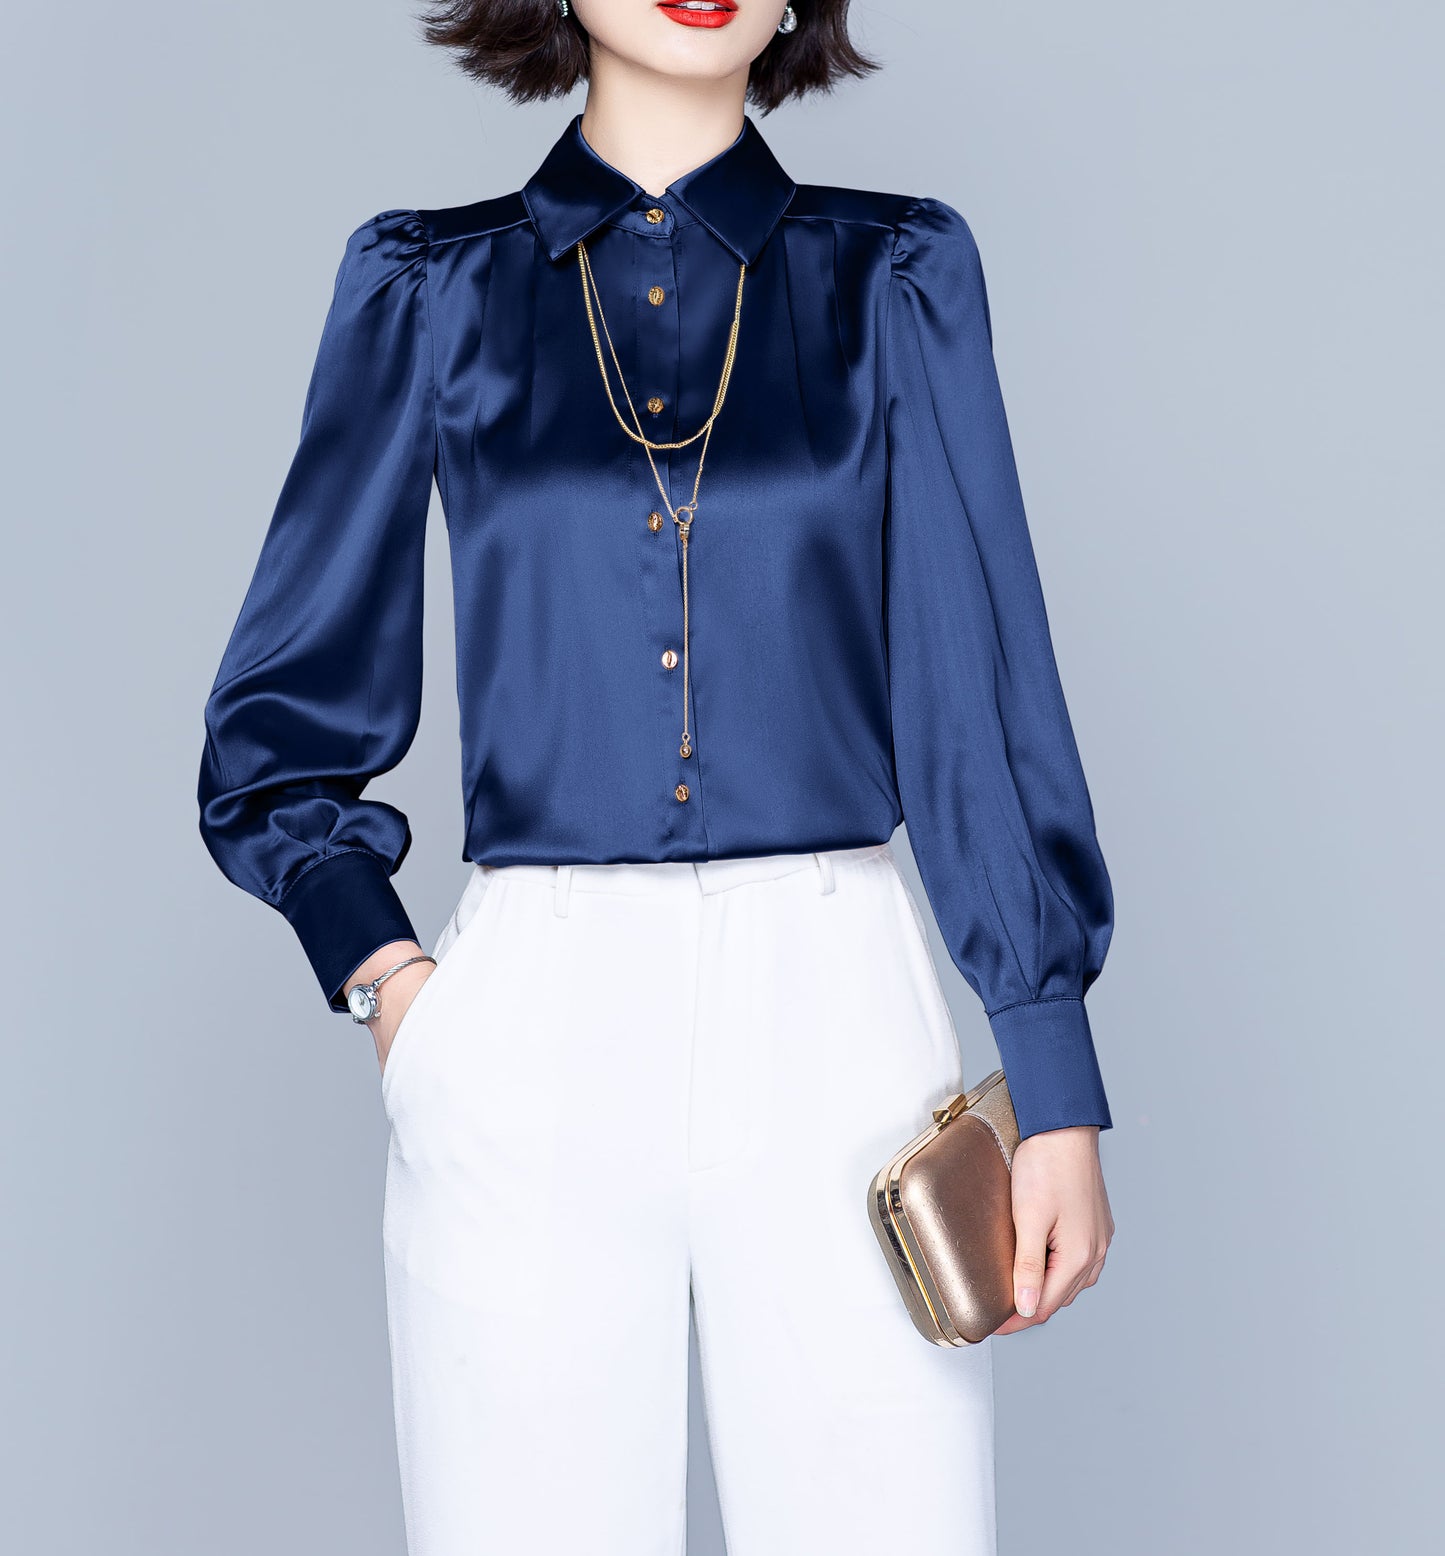 Satin Long Sleeve Lady Casual Silk Office Work Solid Blouse